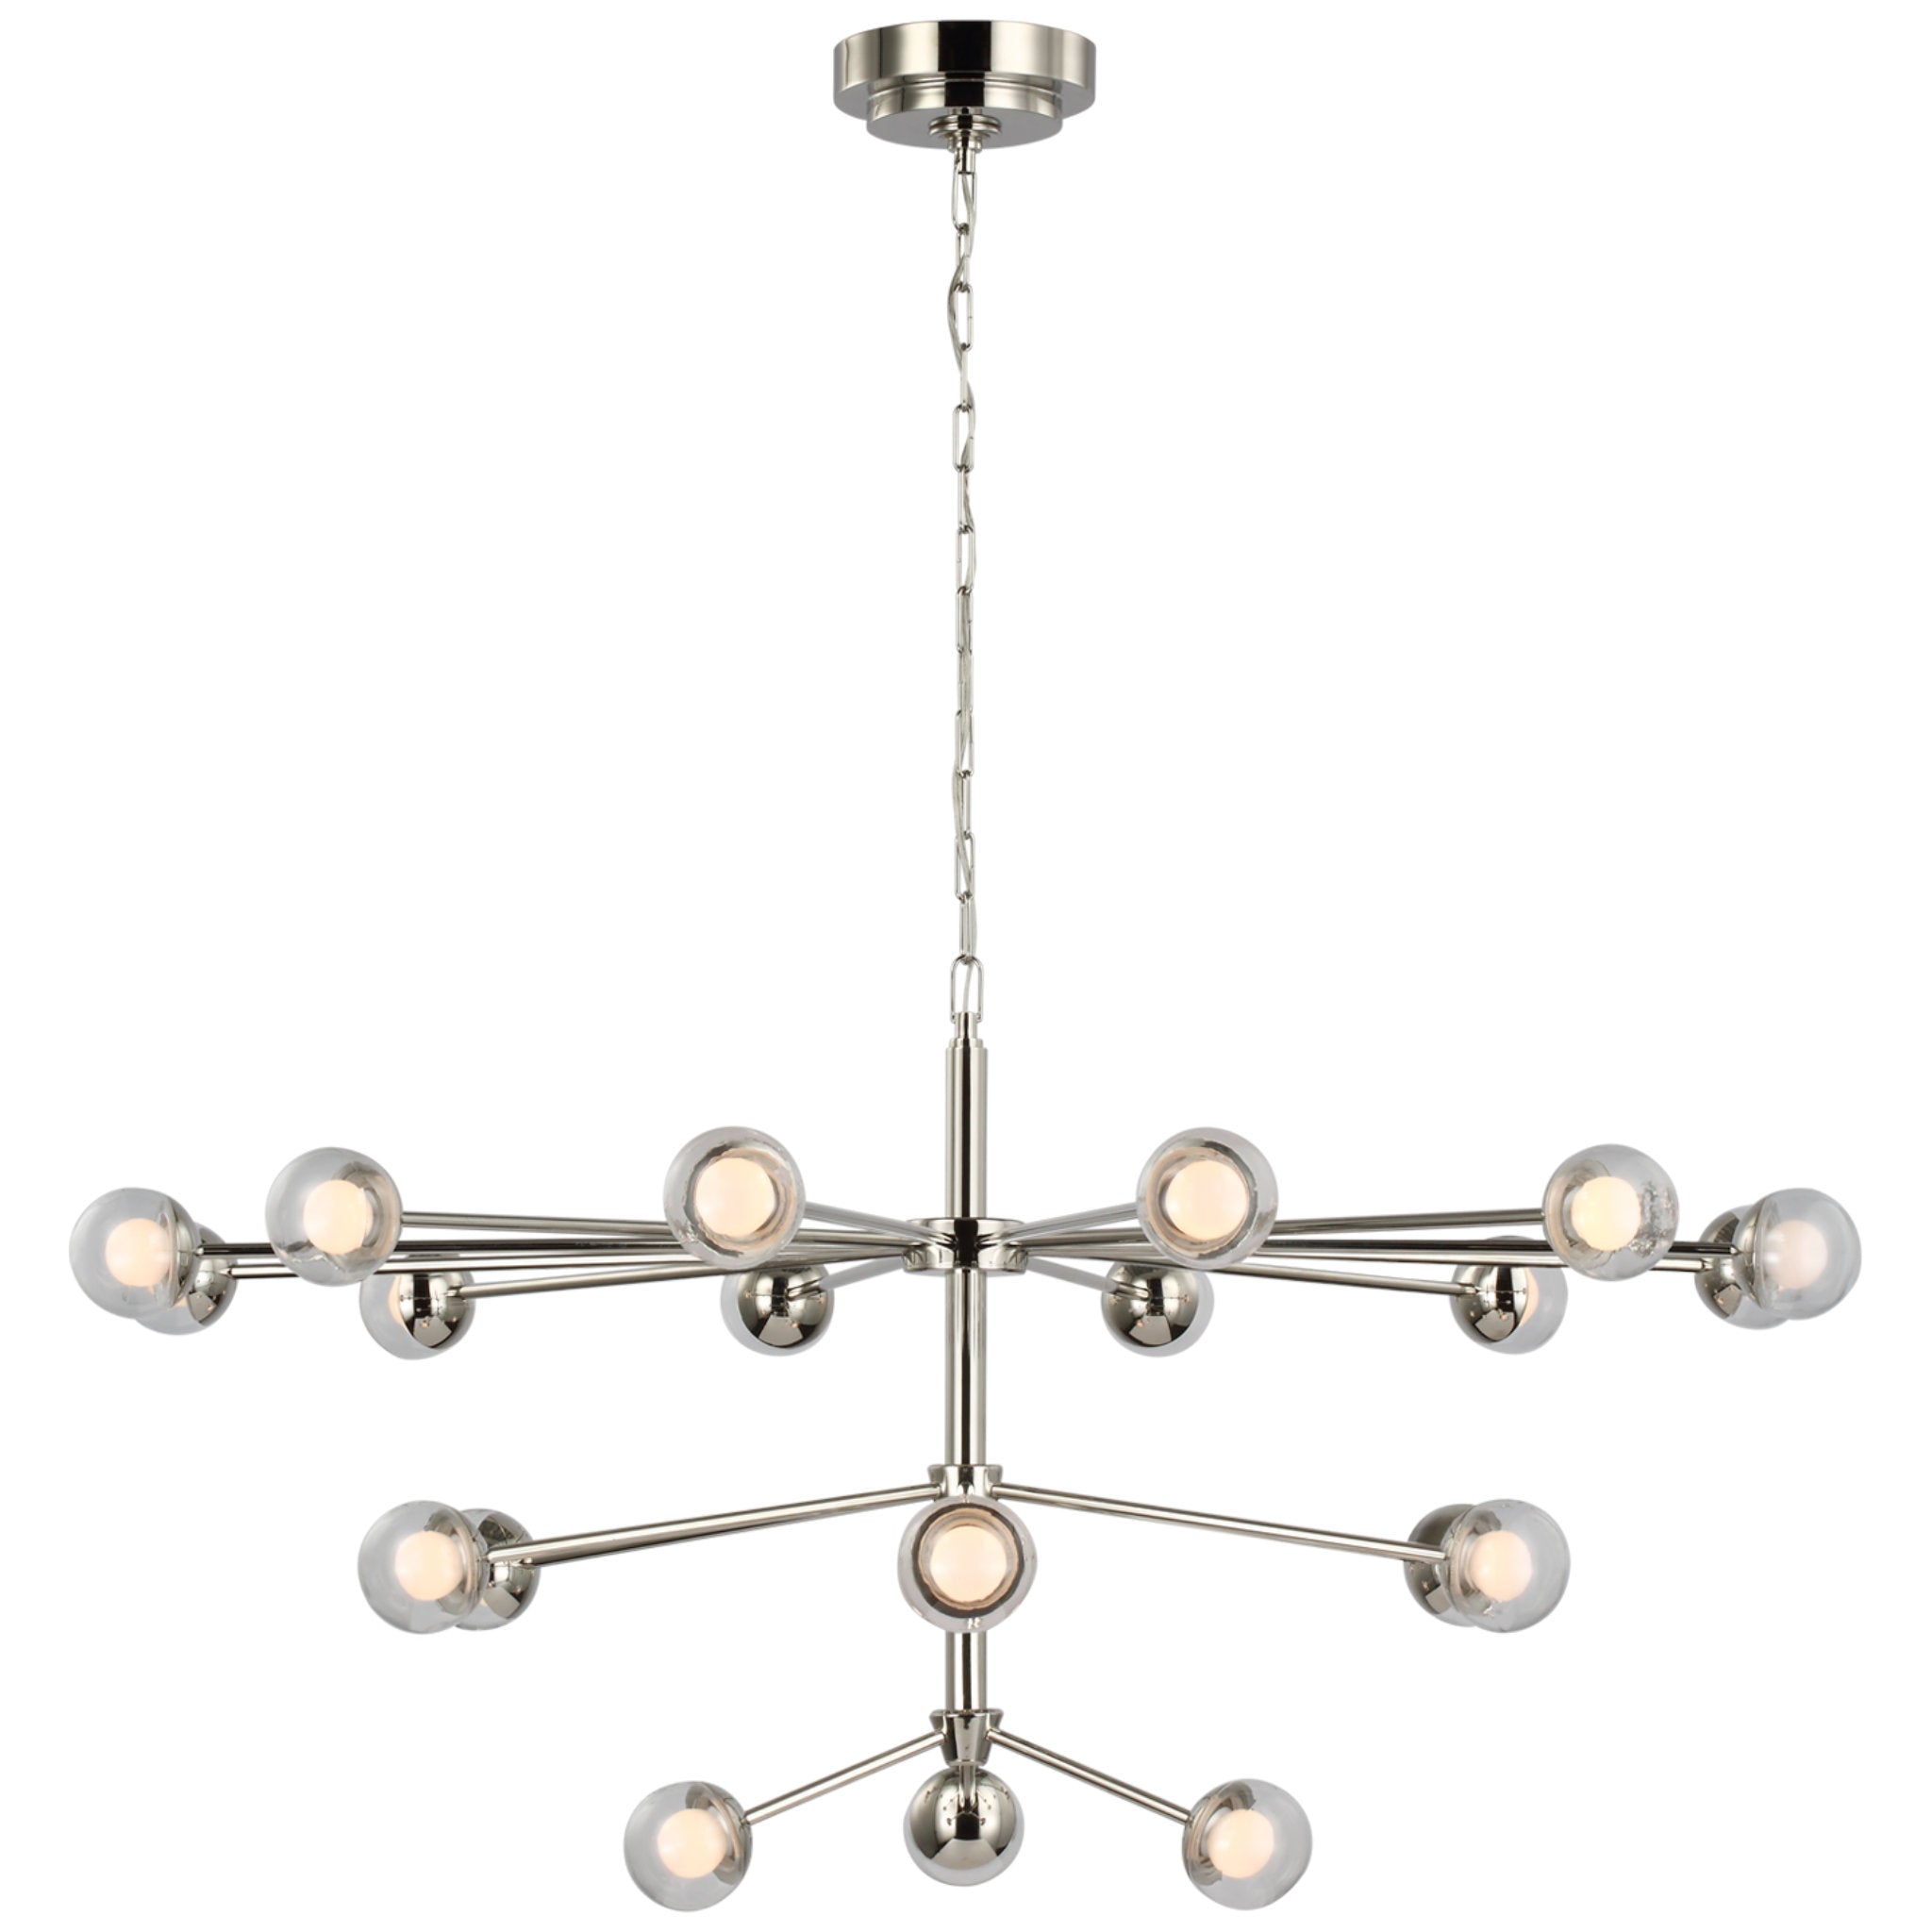 kate spade new york Alloway Large Chandelier in Polished Nickel with Clear Glass